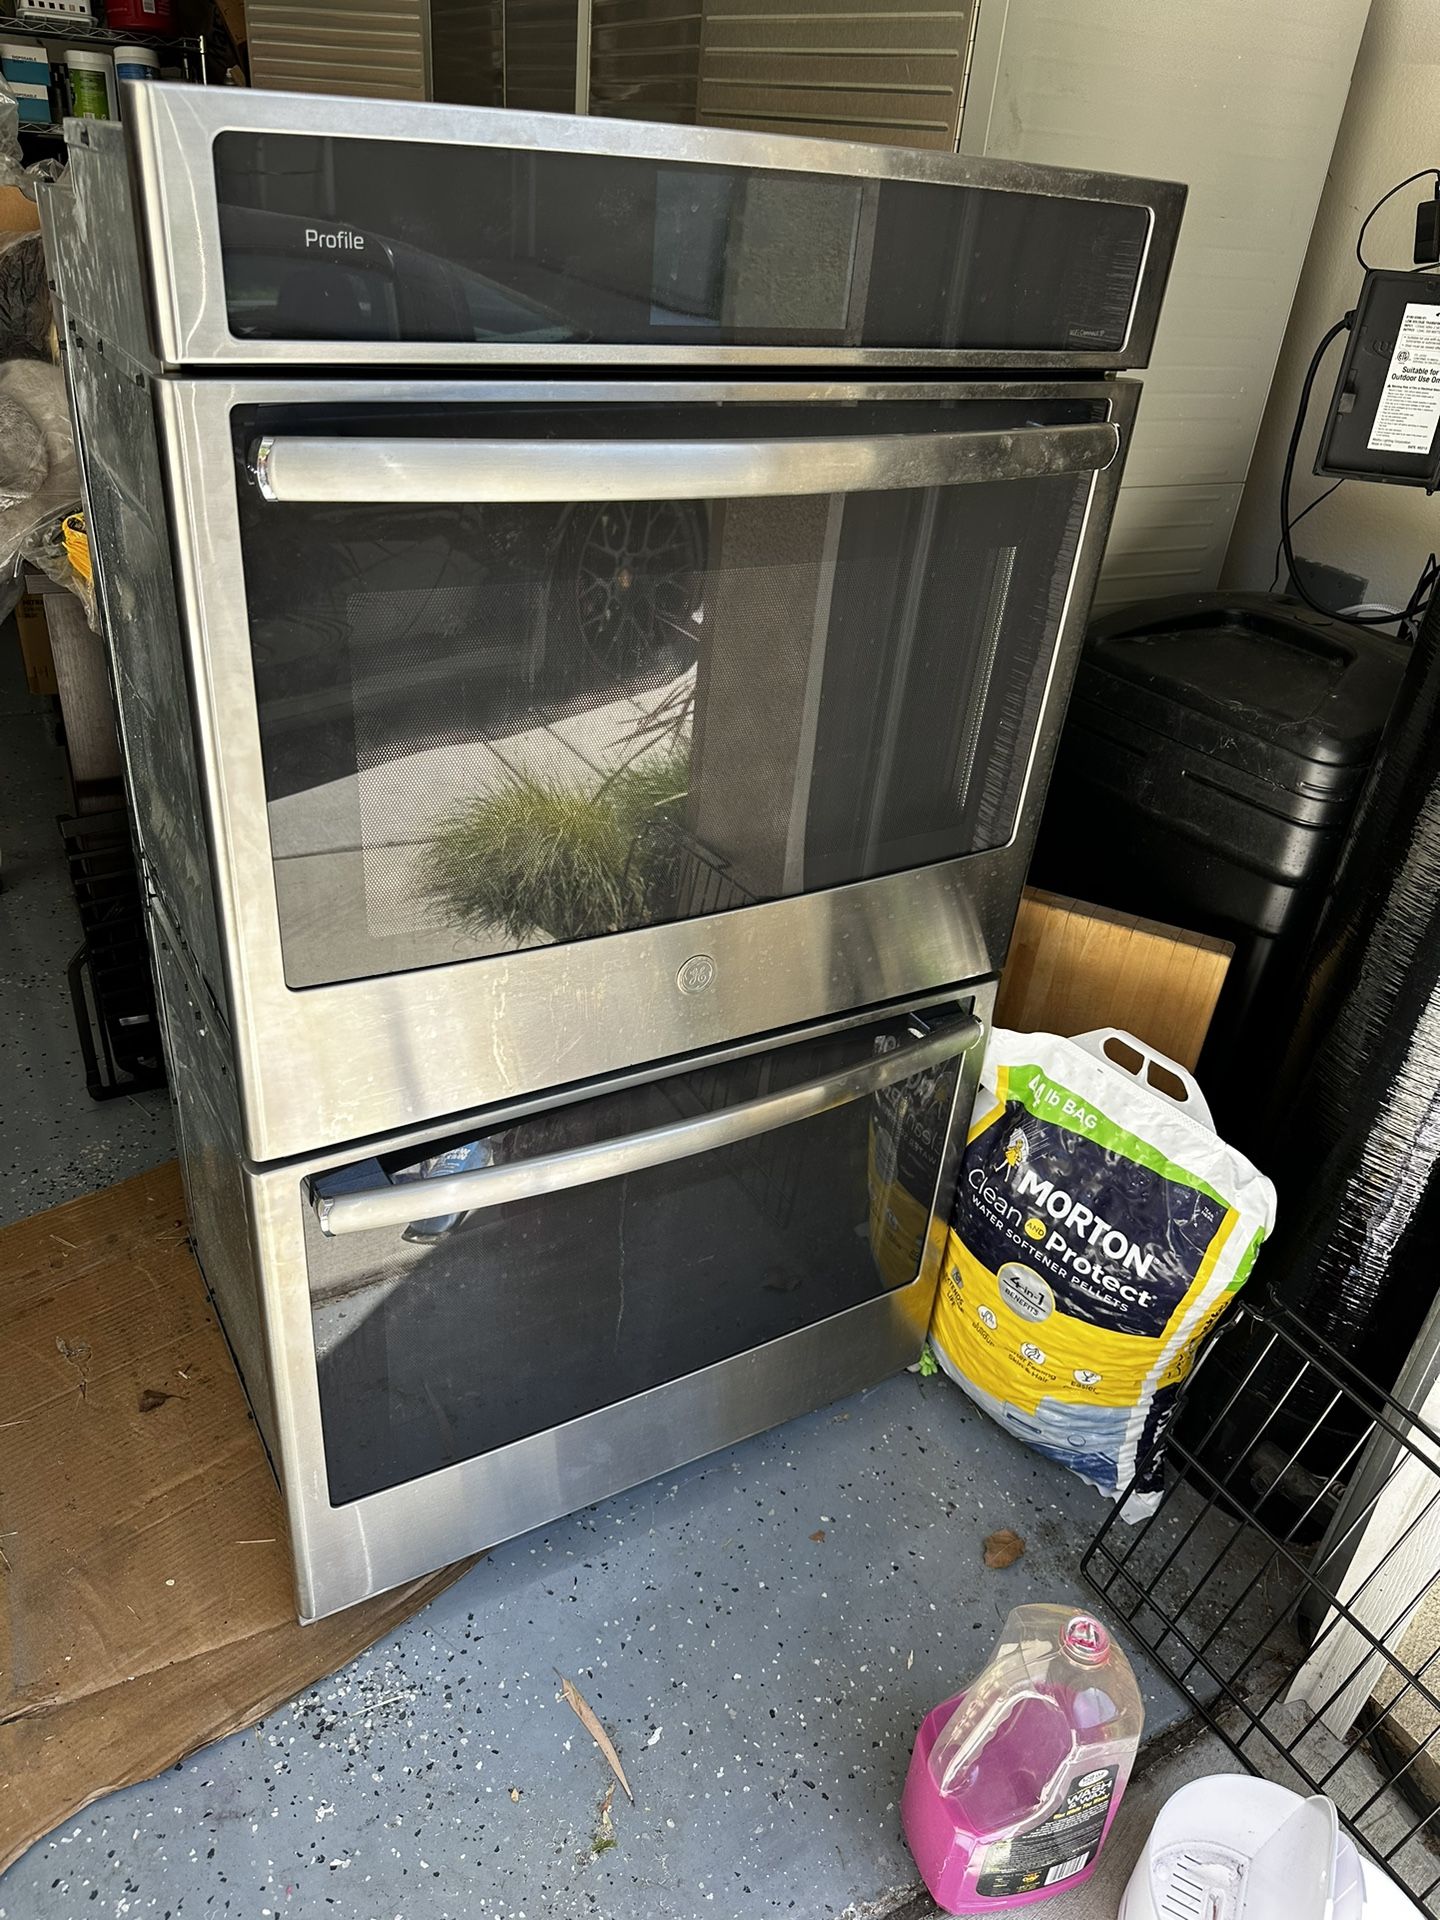 GE Profile Electric Double Oven, 3 Years Old, Like New